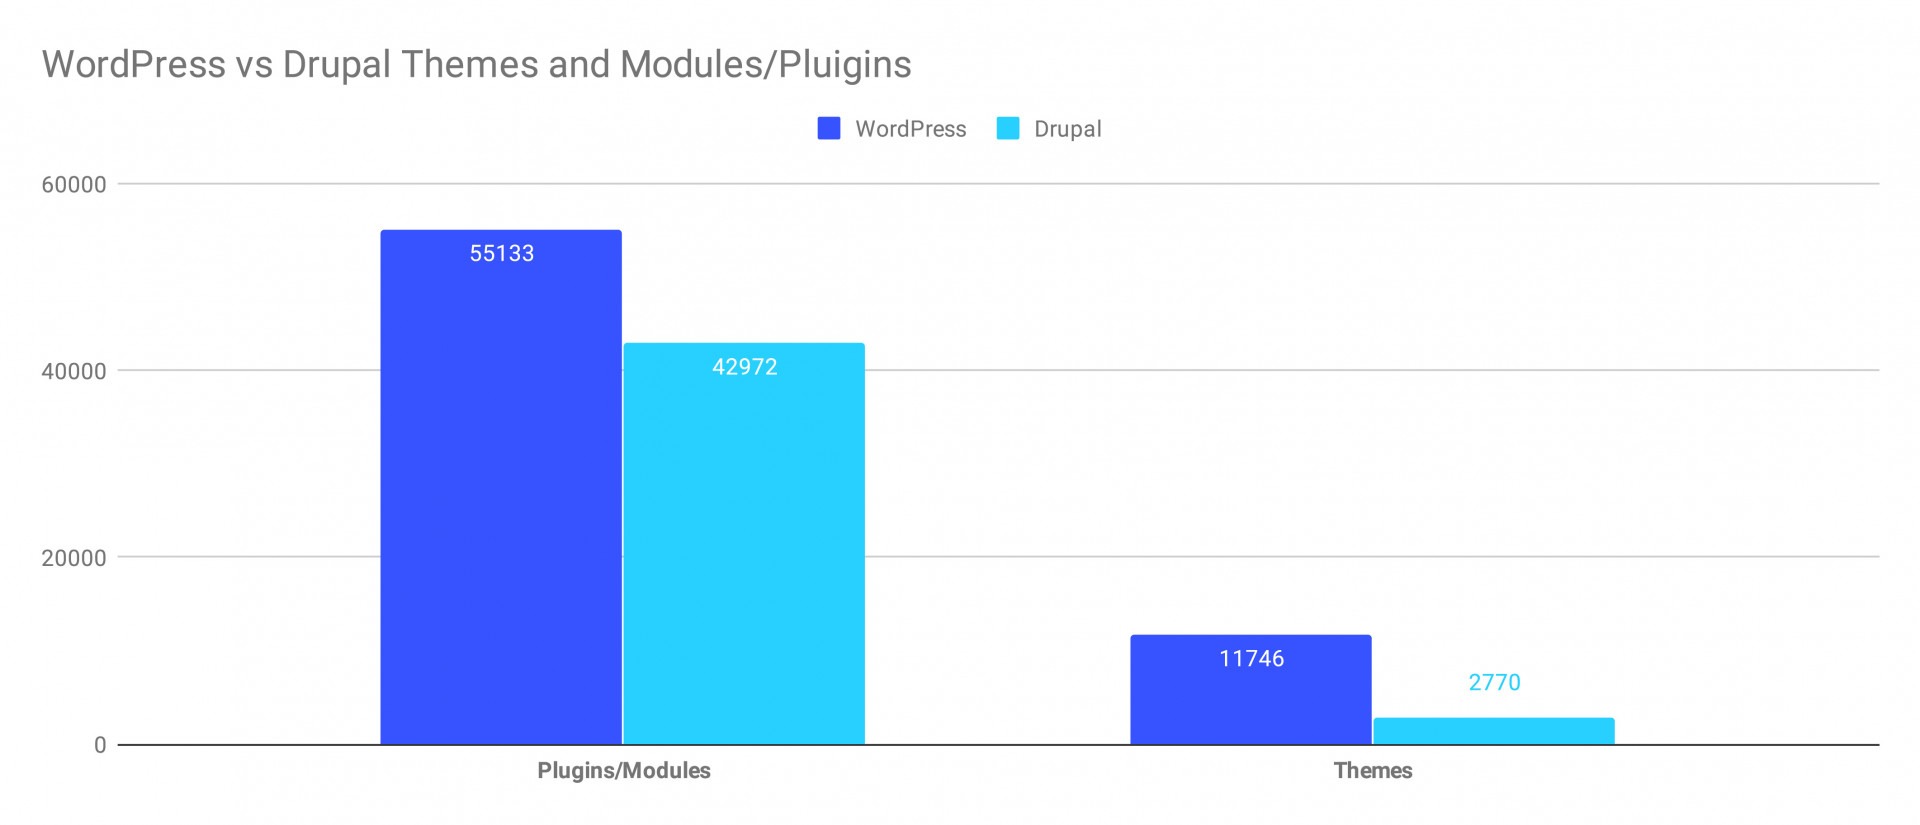 Module and themes statistics for WordPress and Drupal